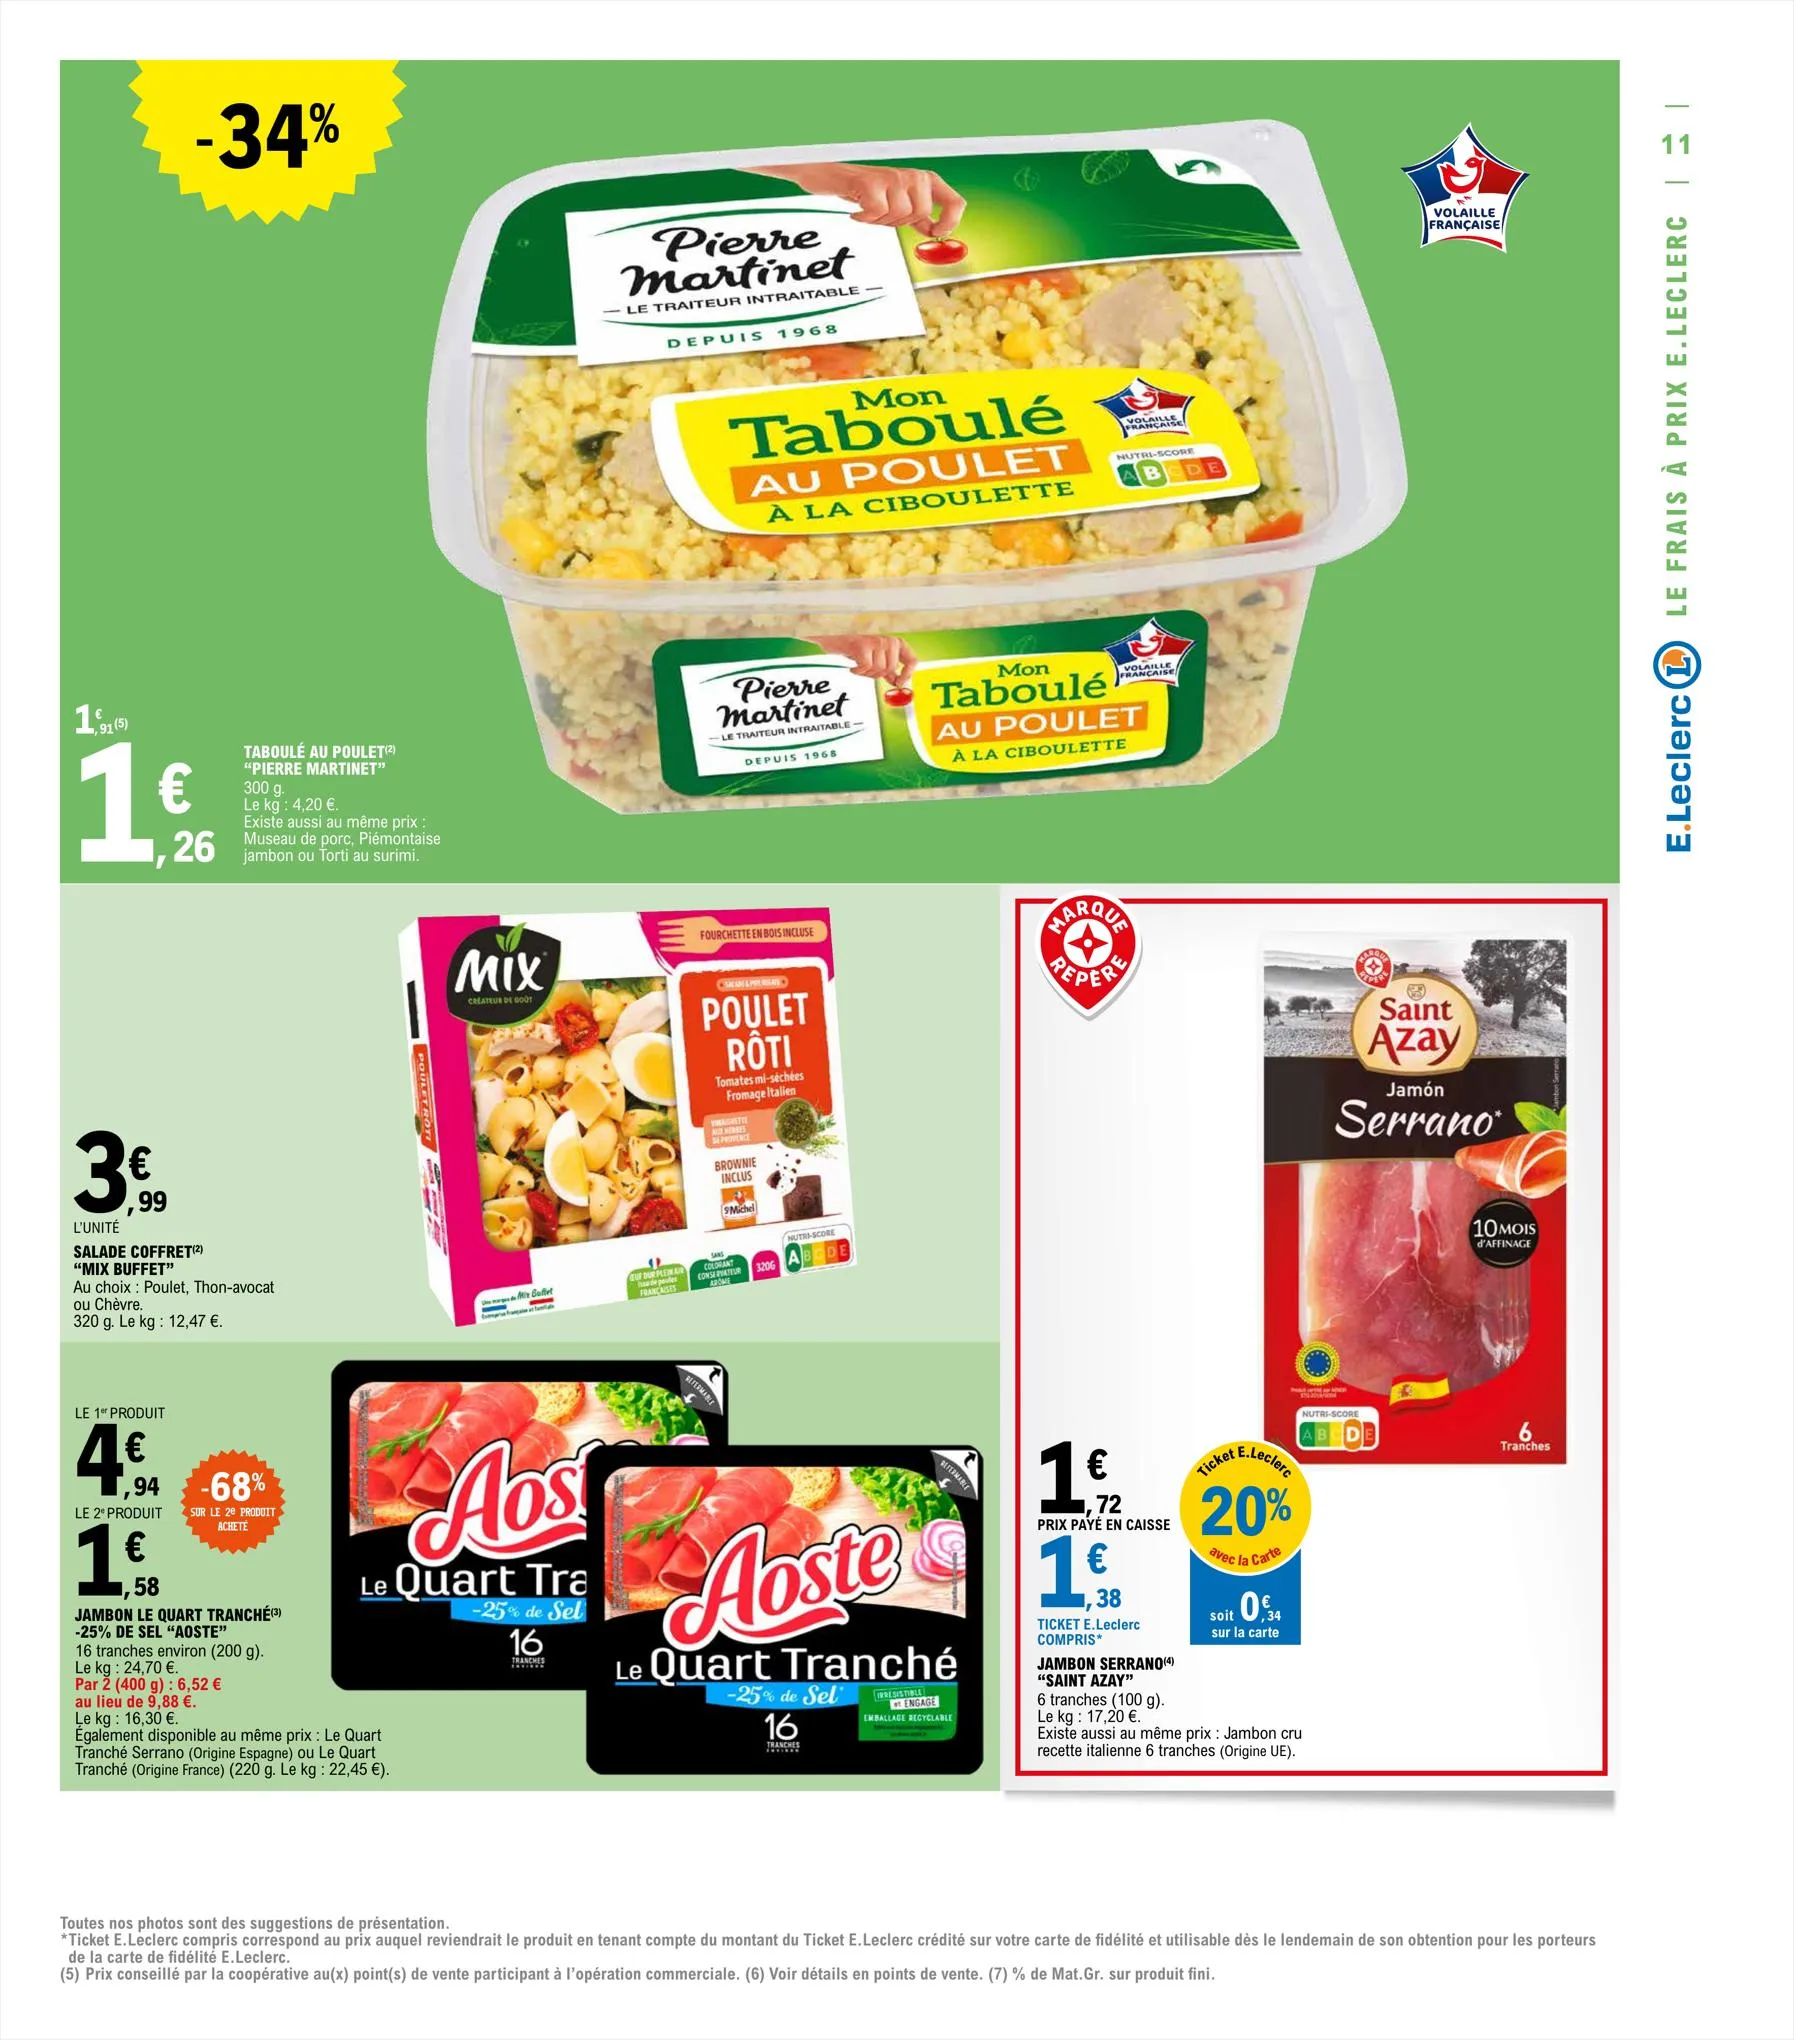 Catalogue Relance Alimentaire 10 - Mixte, page 00011